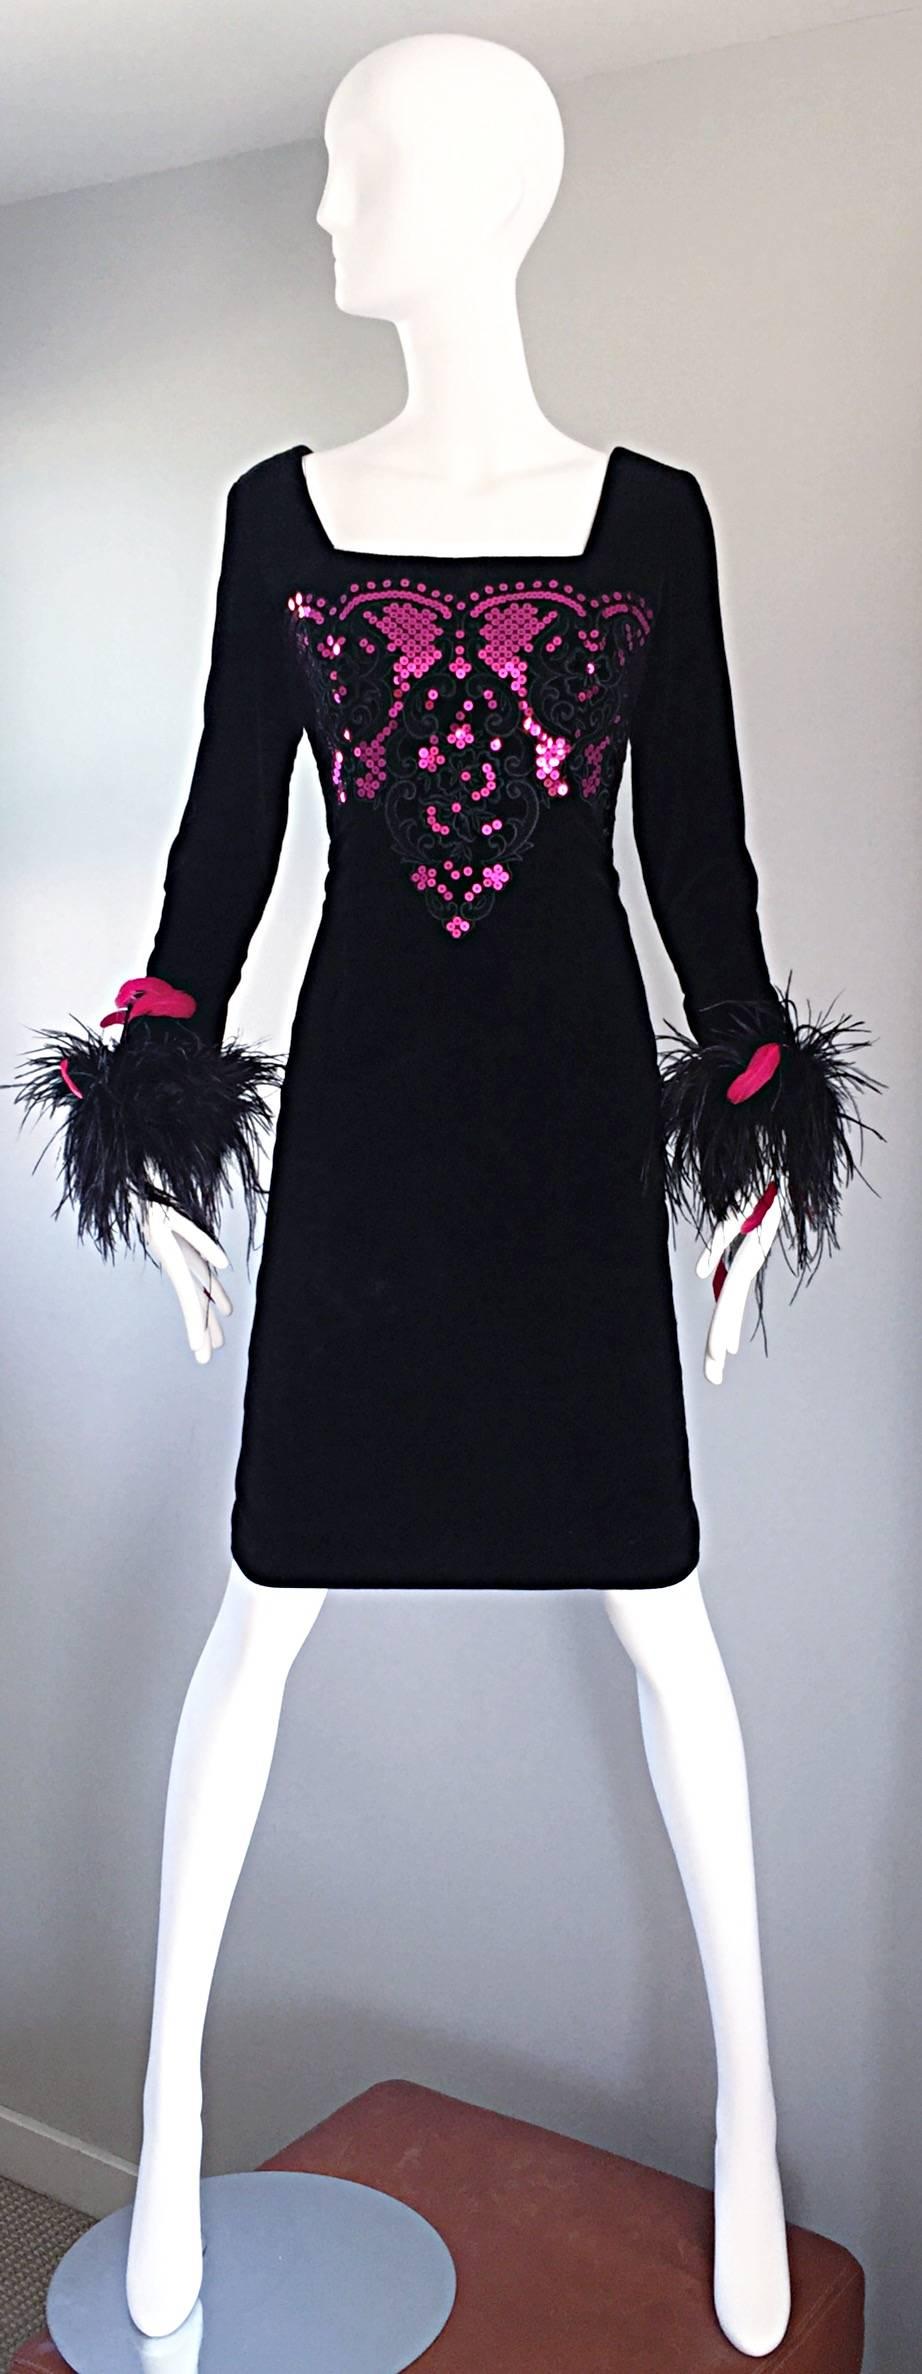 Amazing vintage 1970s / 70s ALBERT NIPON for I. MAGNIN black cotton velvet dress! Features an embroidered, encrusted with hundreds of hot pink fuchsia sequins throughout the front and back of the boned bodice. Pink and black ostrich feathers at the